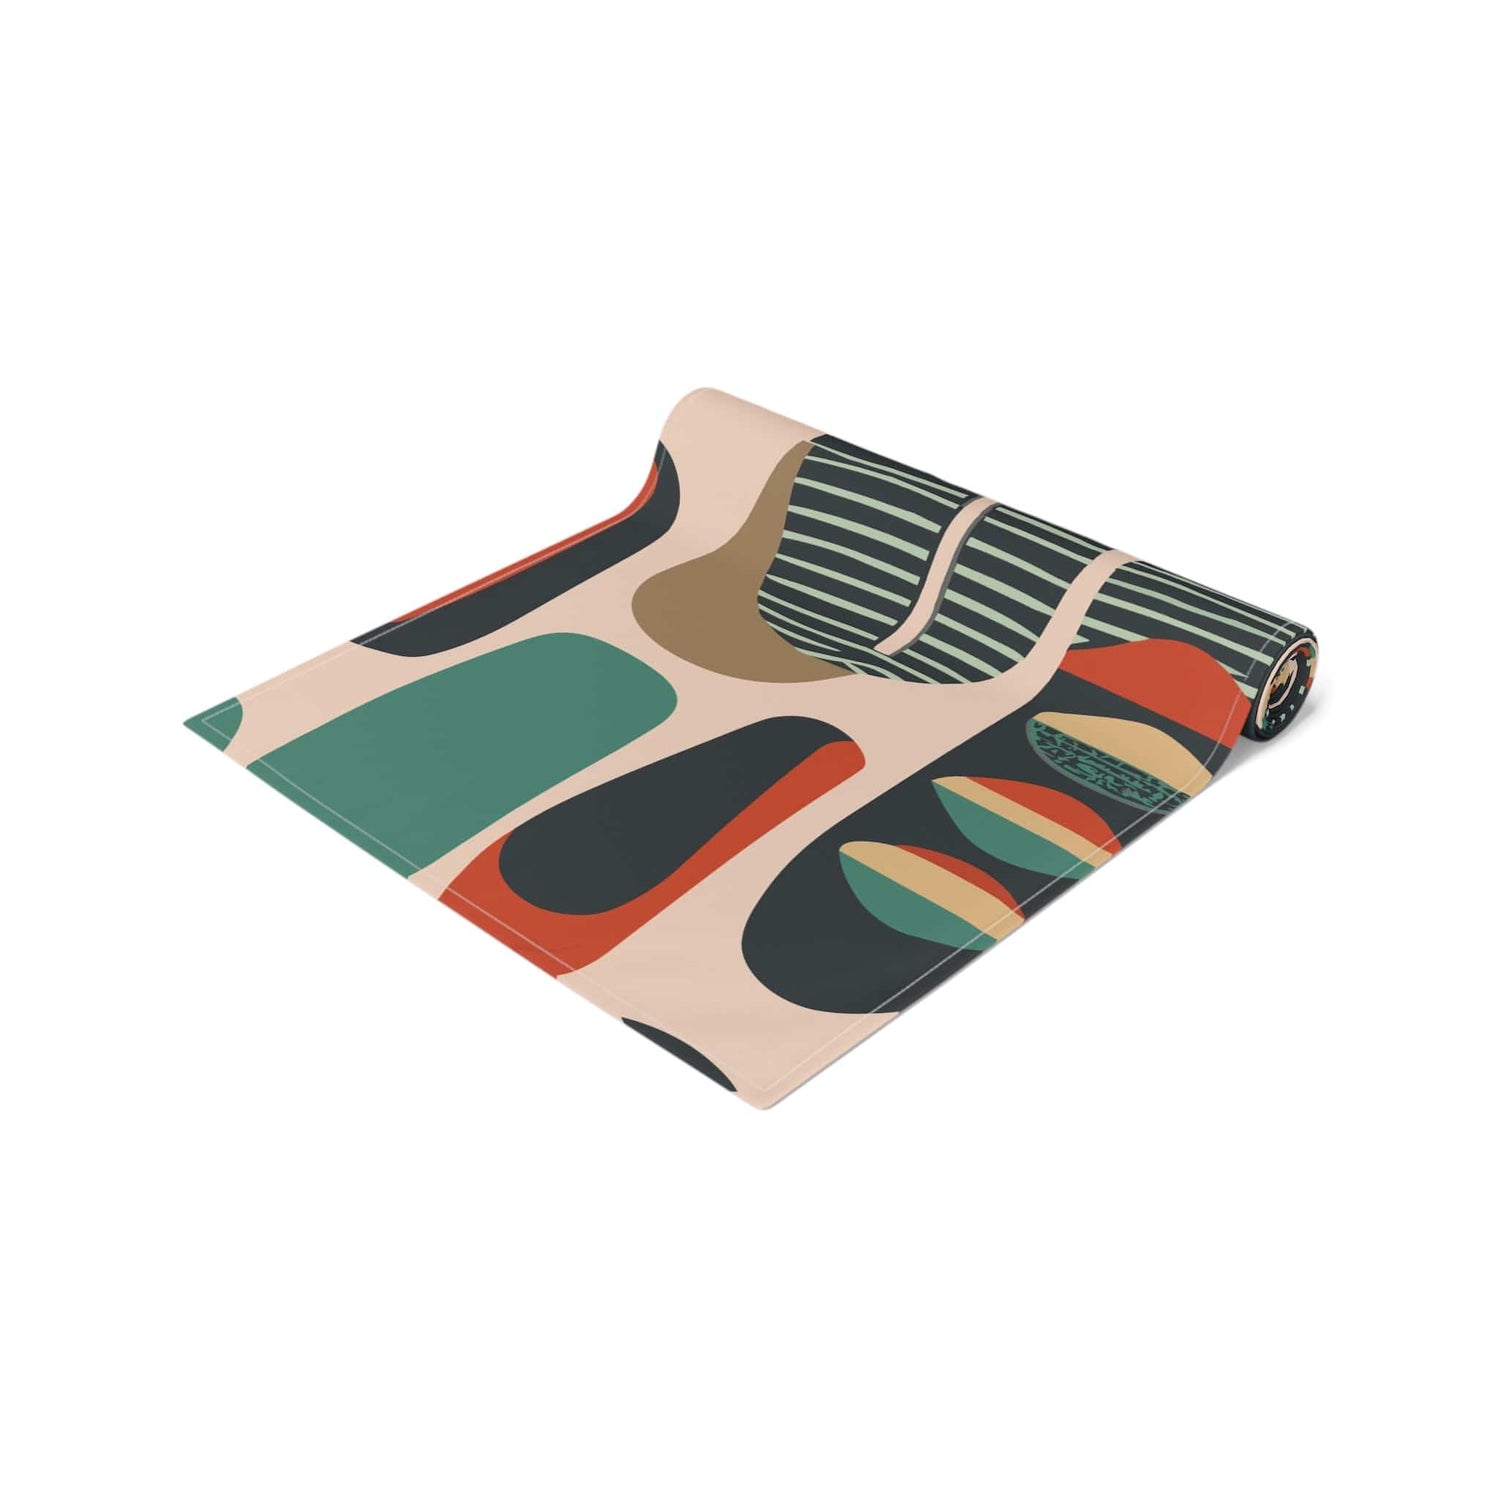 Kate McEnroe New York Retro Mod Table Runner, MCM Geometric Dining Decor, Abstract Shapes Table Linen, Mid Century Modern Table AccessoryTable Runners32034221429473875266